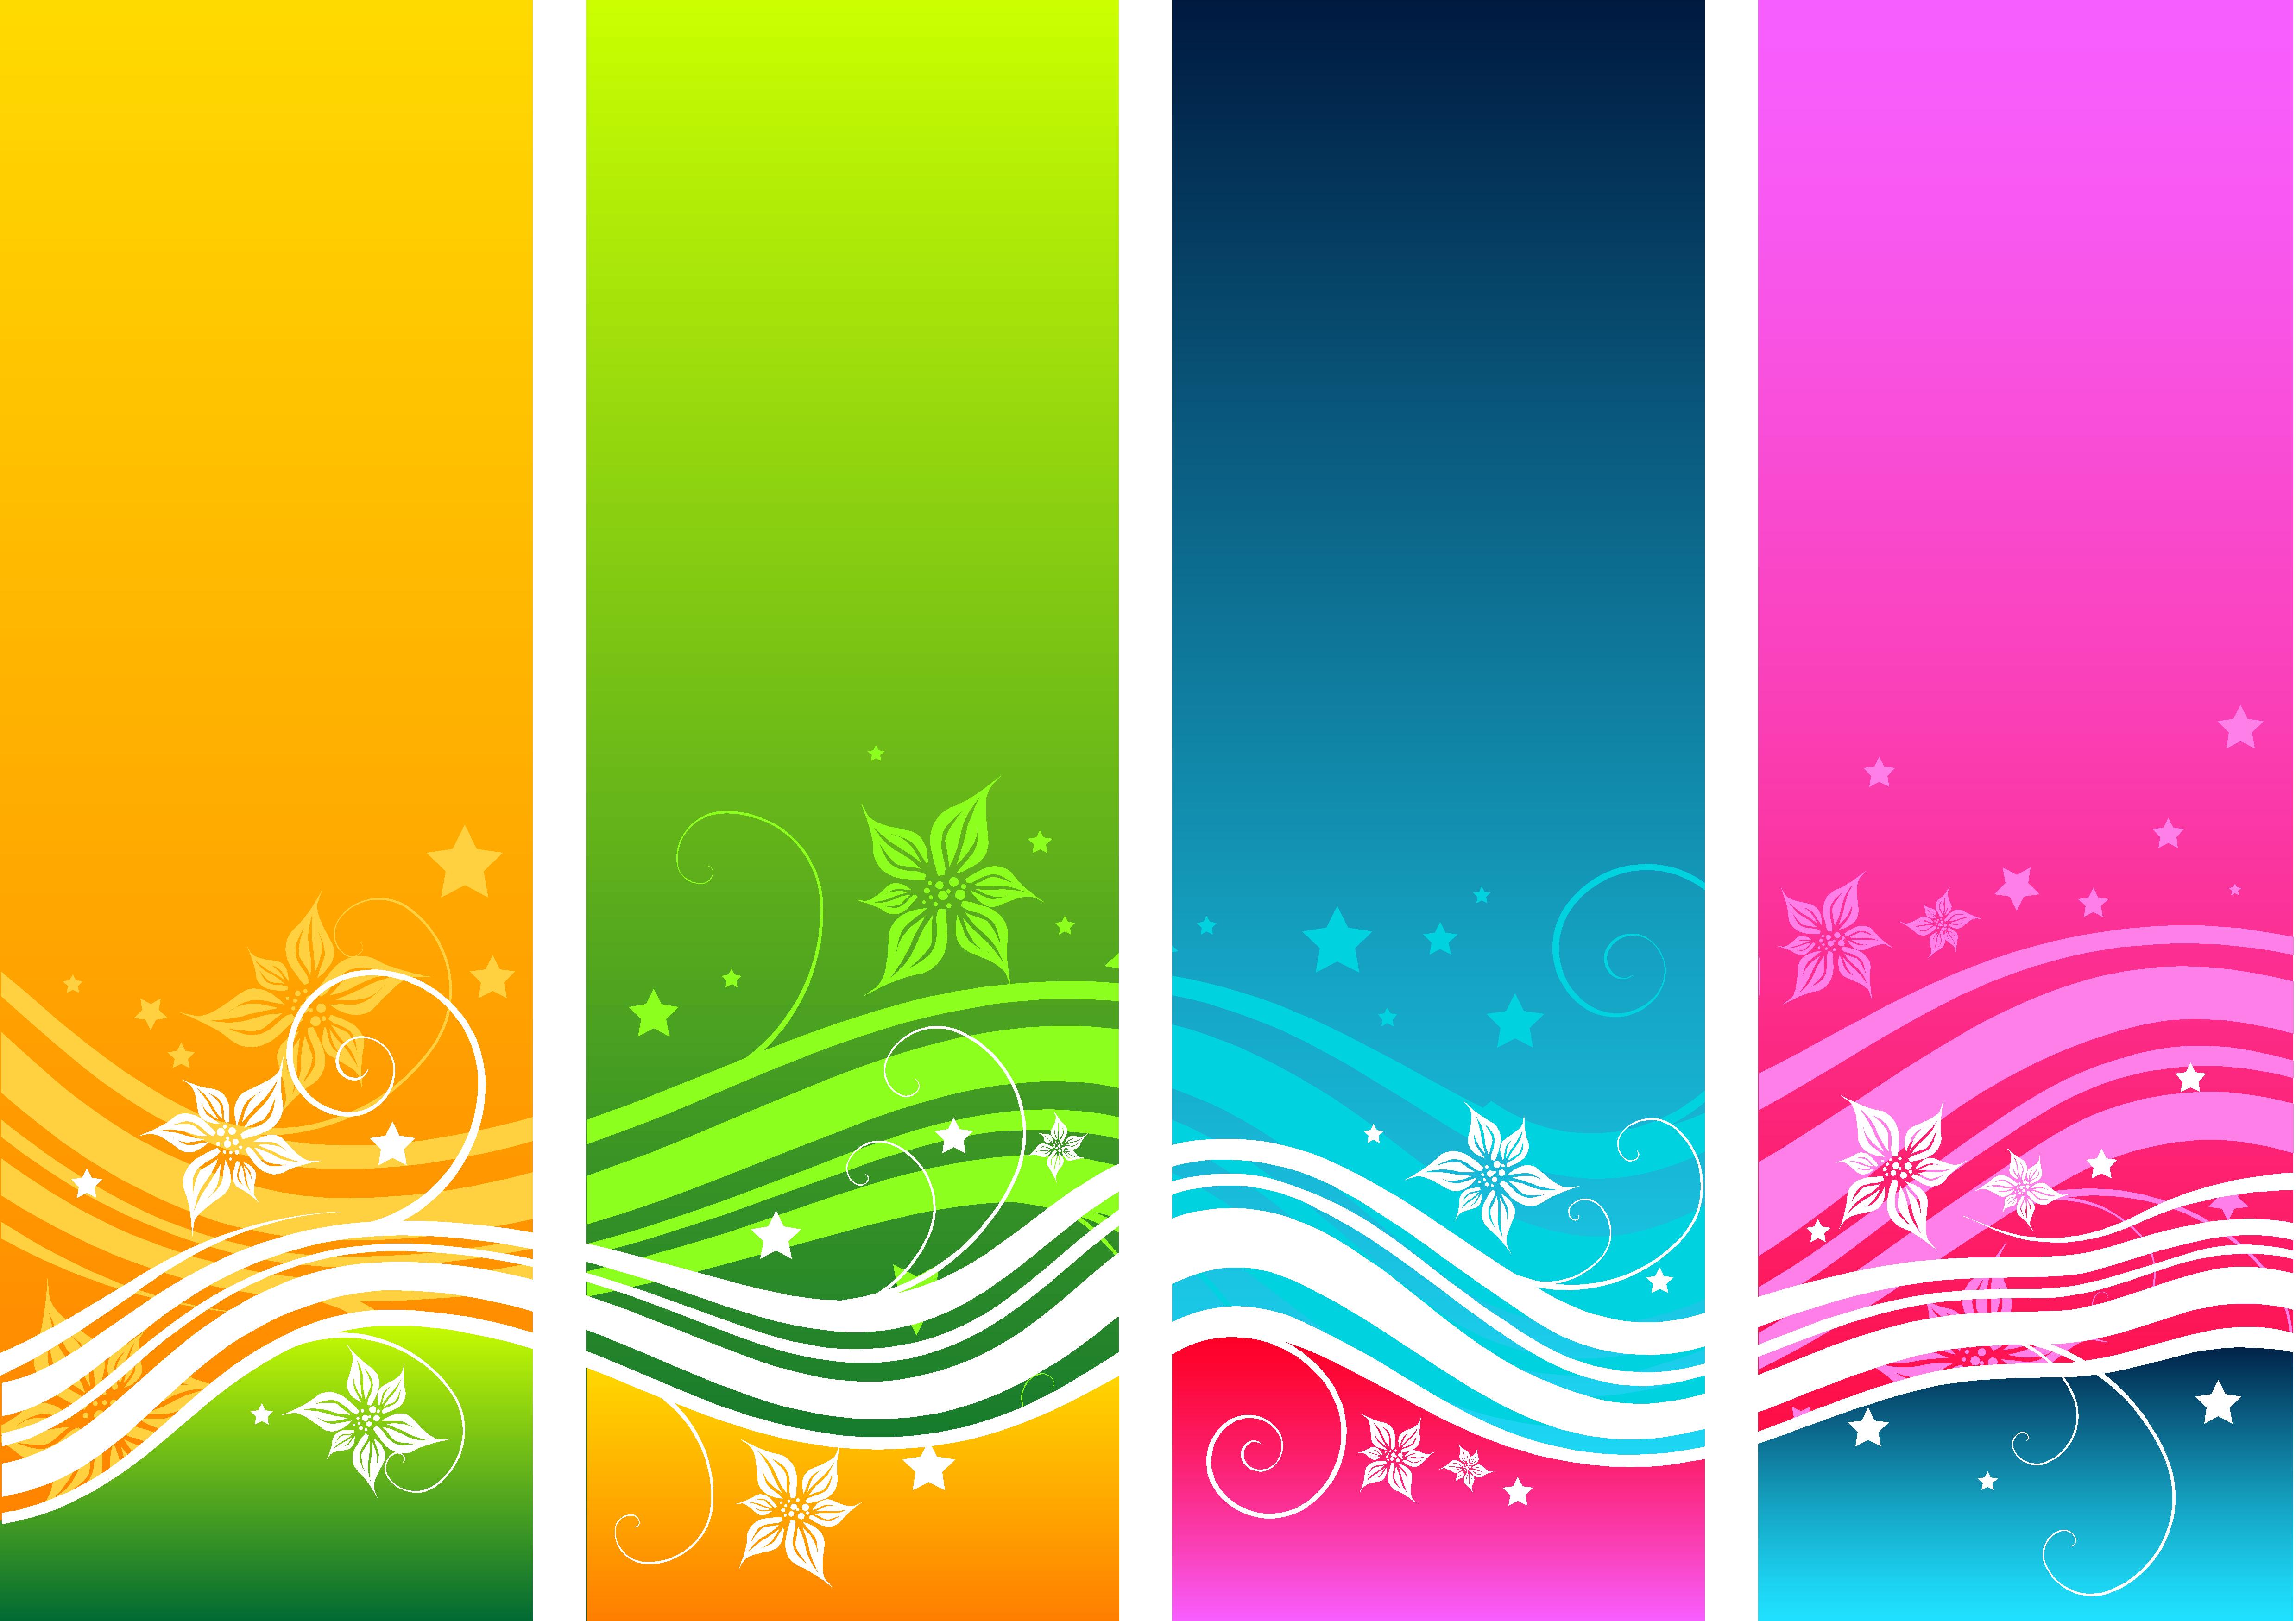 Free Floral Swirls Vector Background Free Vector / 4Vector